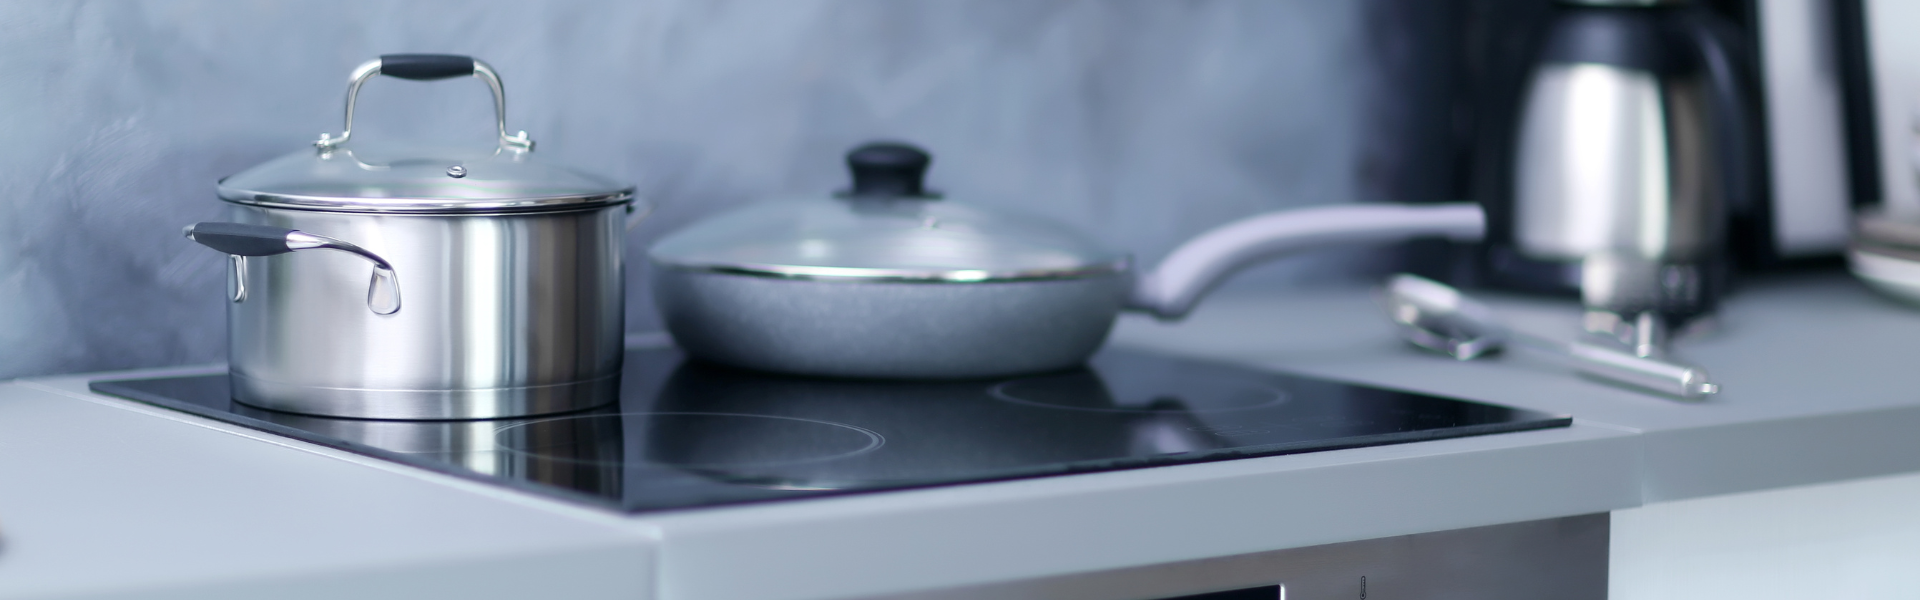 Choosing the Right Inbuilt Hob for Your Kitchen: Gas vs. Electric